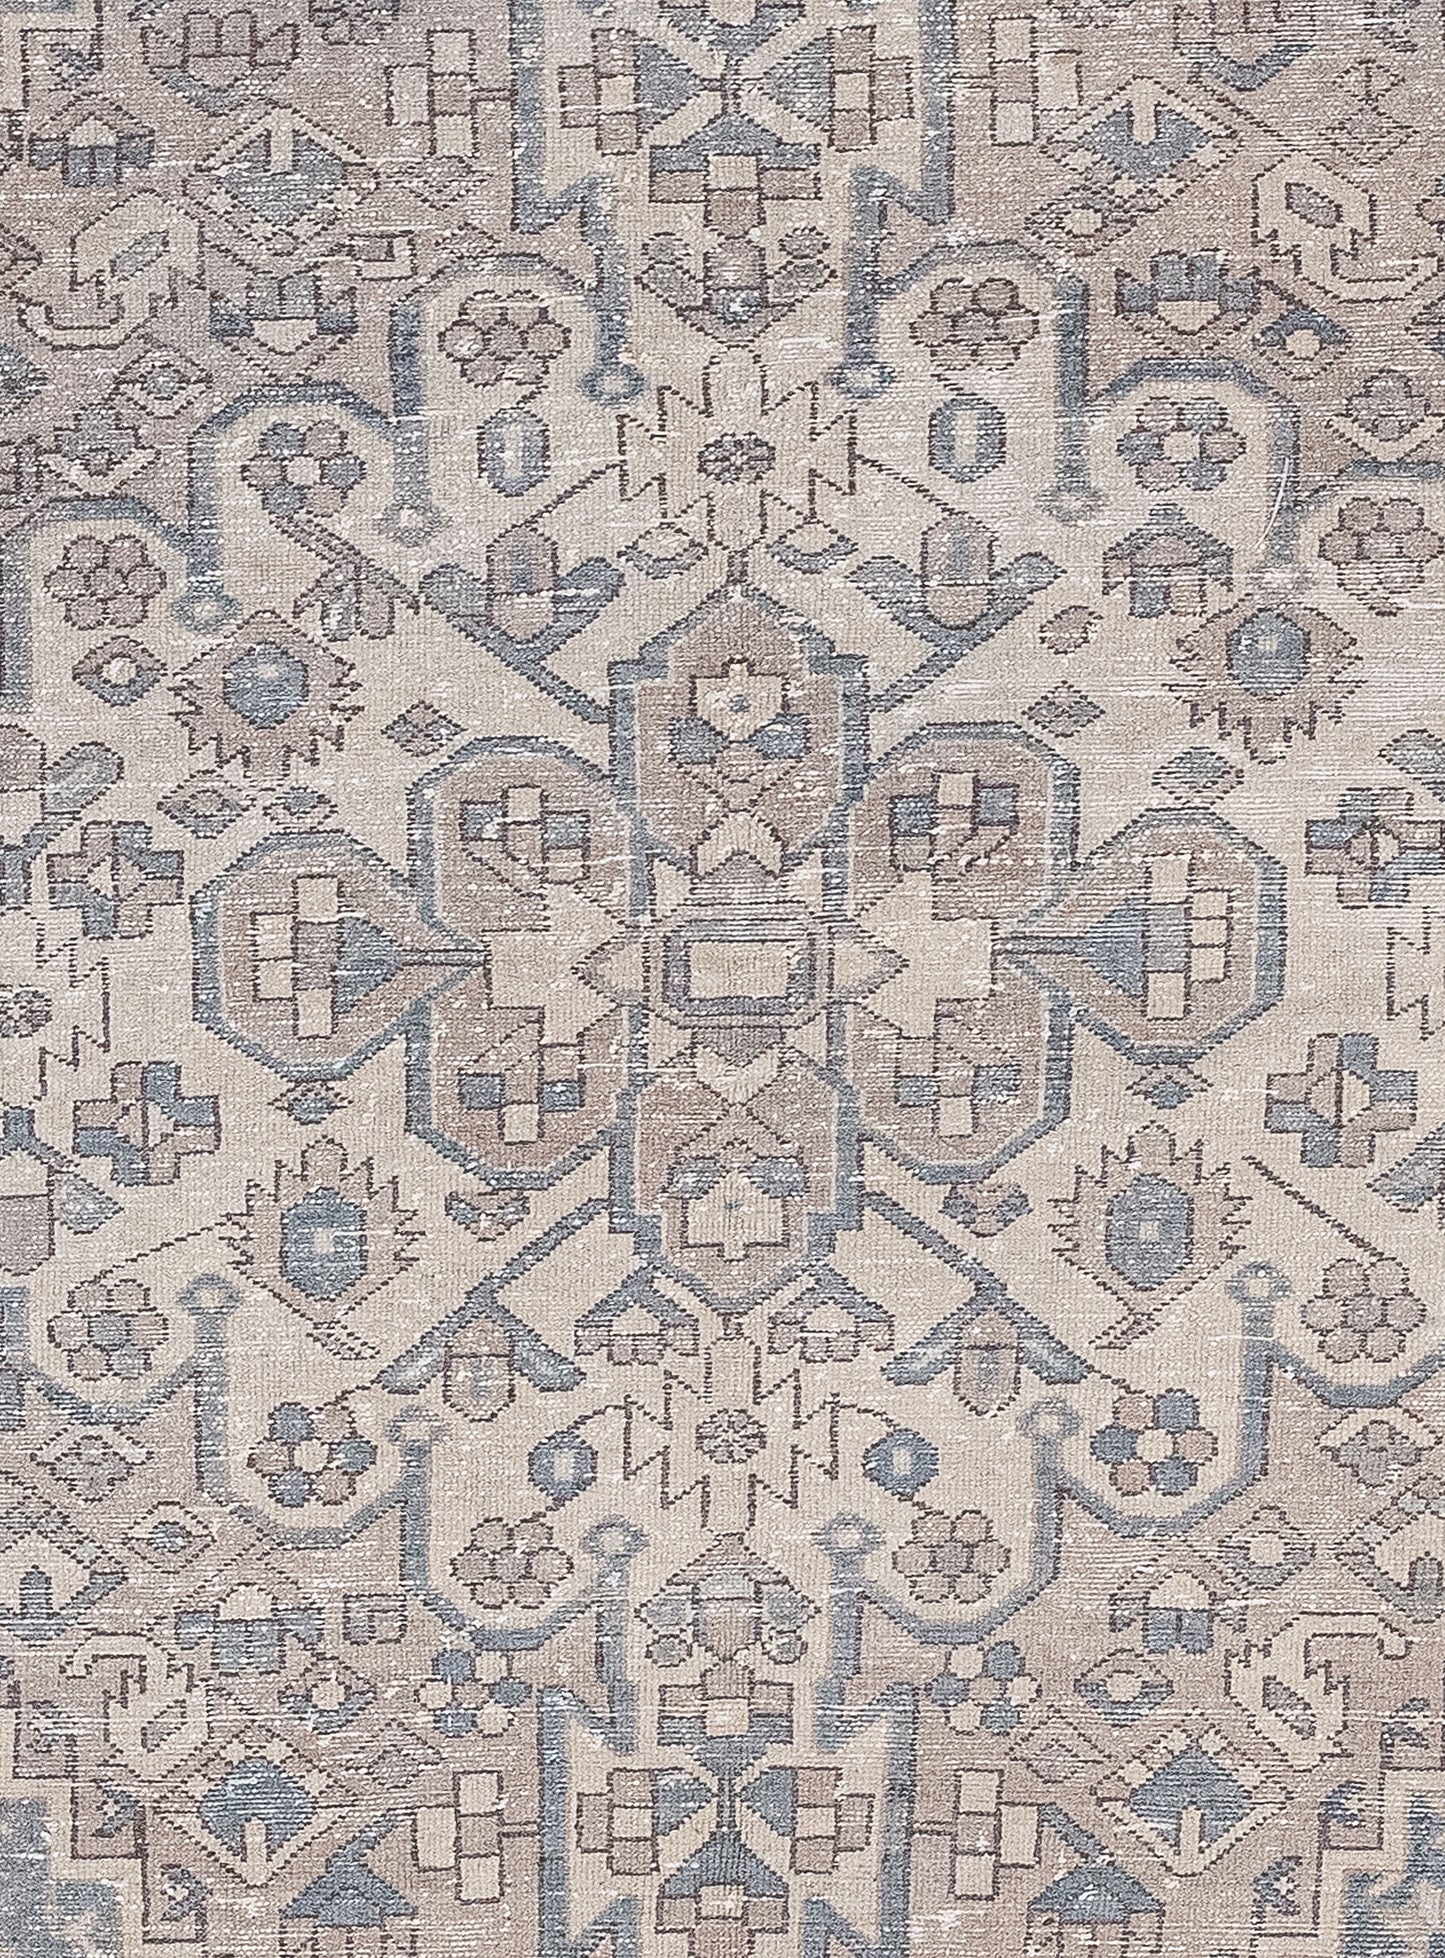 The close-up of the carpet  features an organized design made up of many small abstract squares, hexagons, triangles, and polygons, all arranged symmetrically.